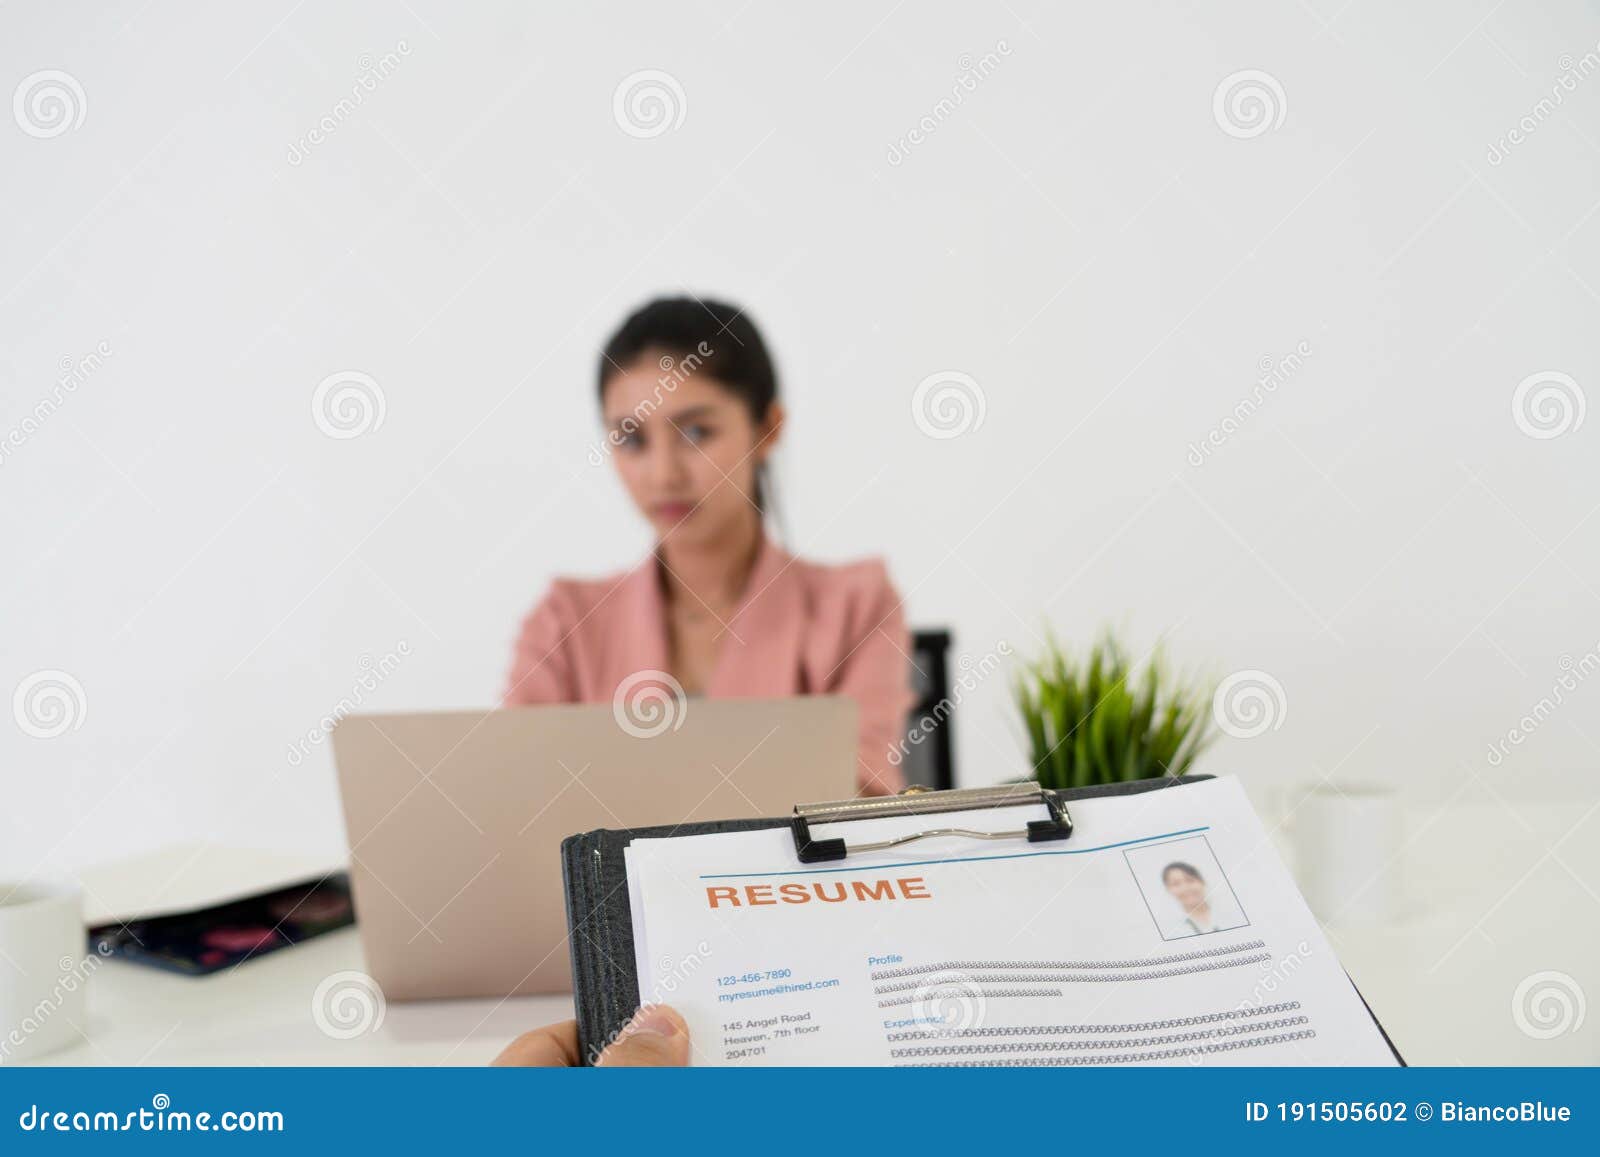 Resume Sent To Human Resources For Job Application Stock Photo Image Of Manager Handshake 191505602